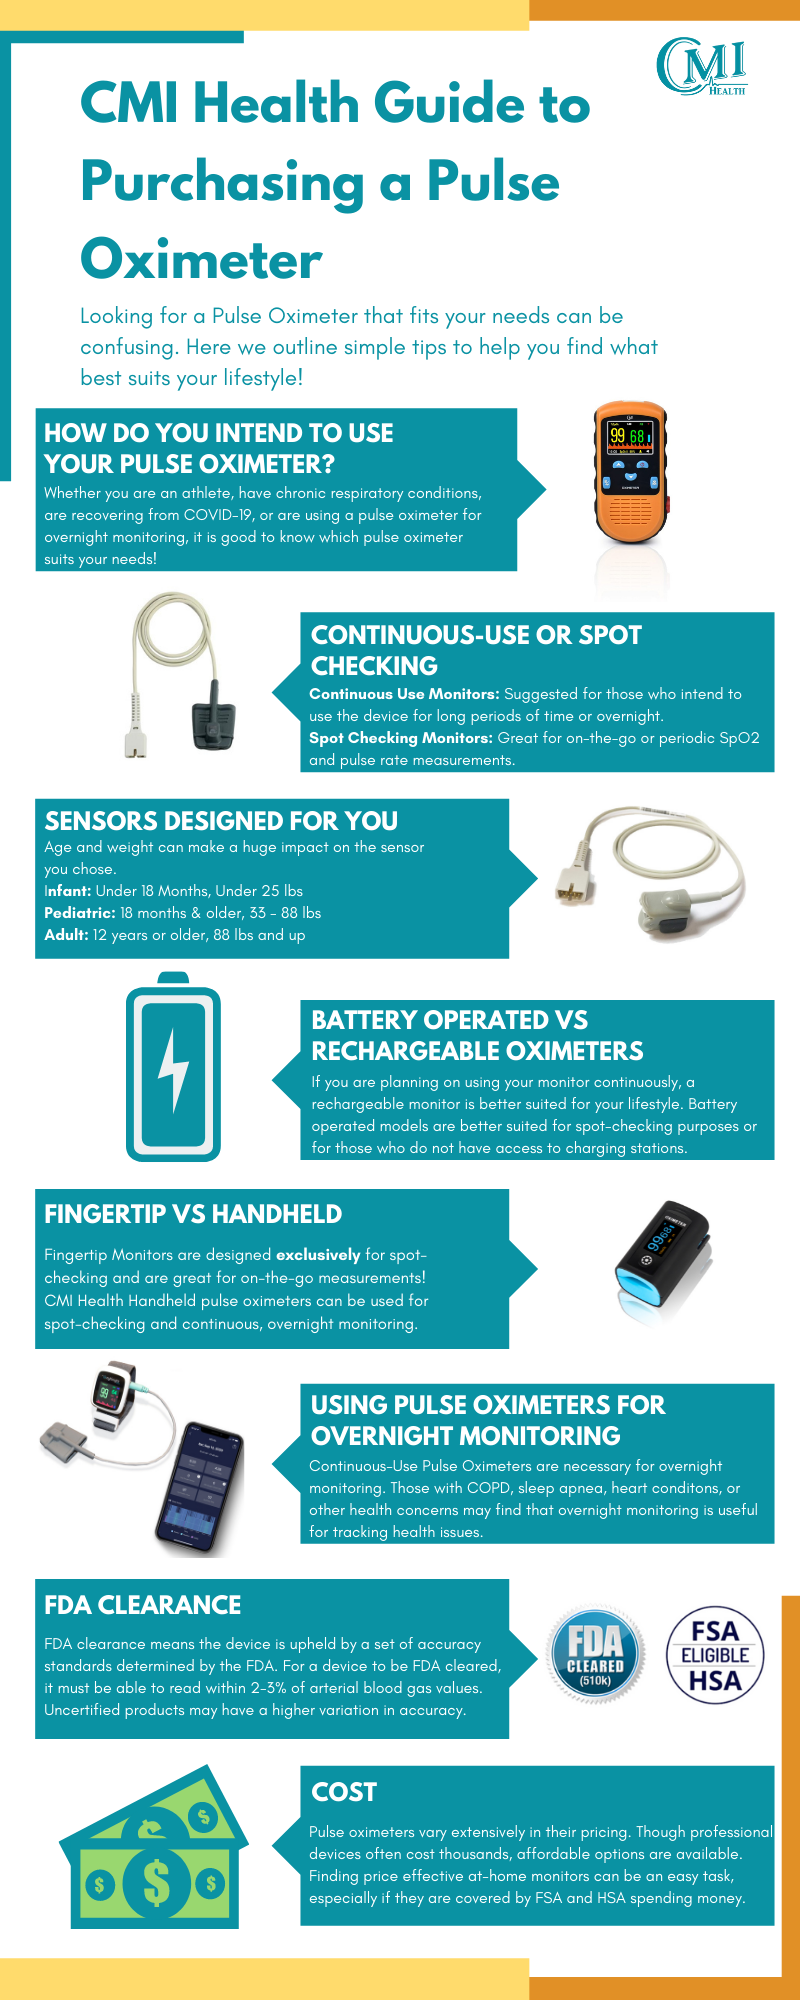 Guide to Purchasing a Pulse Oximeter Infographic - CMI Health